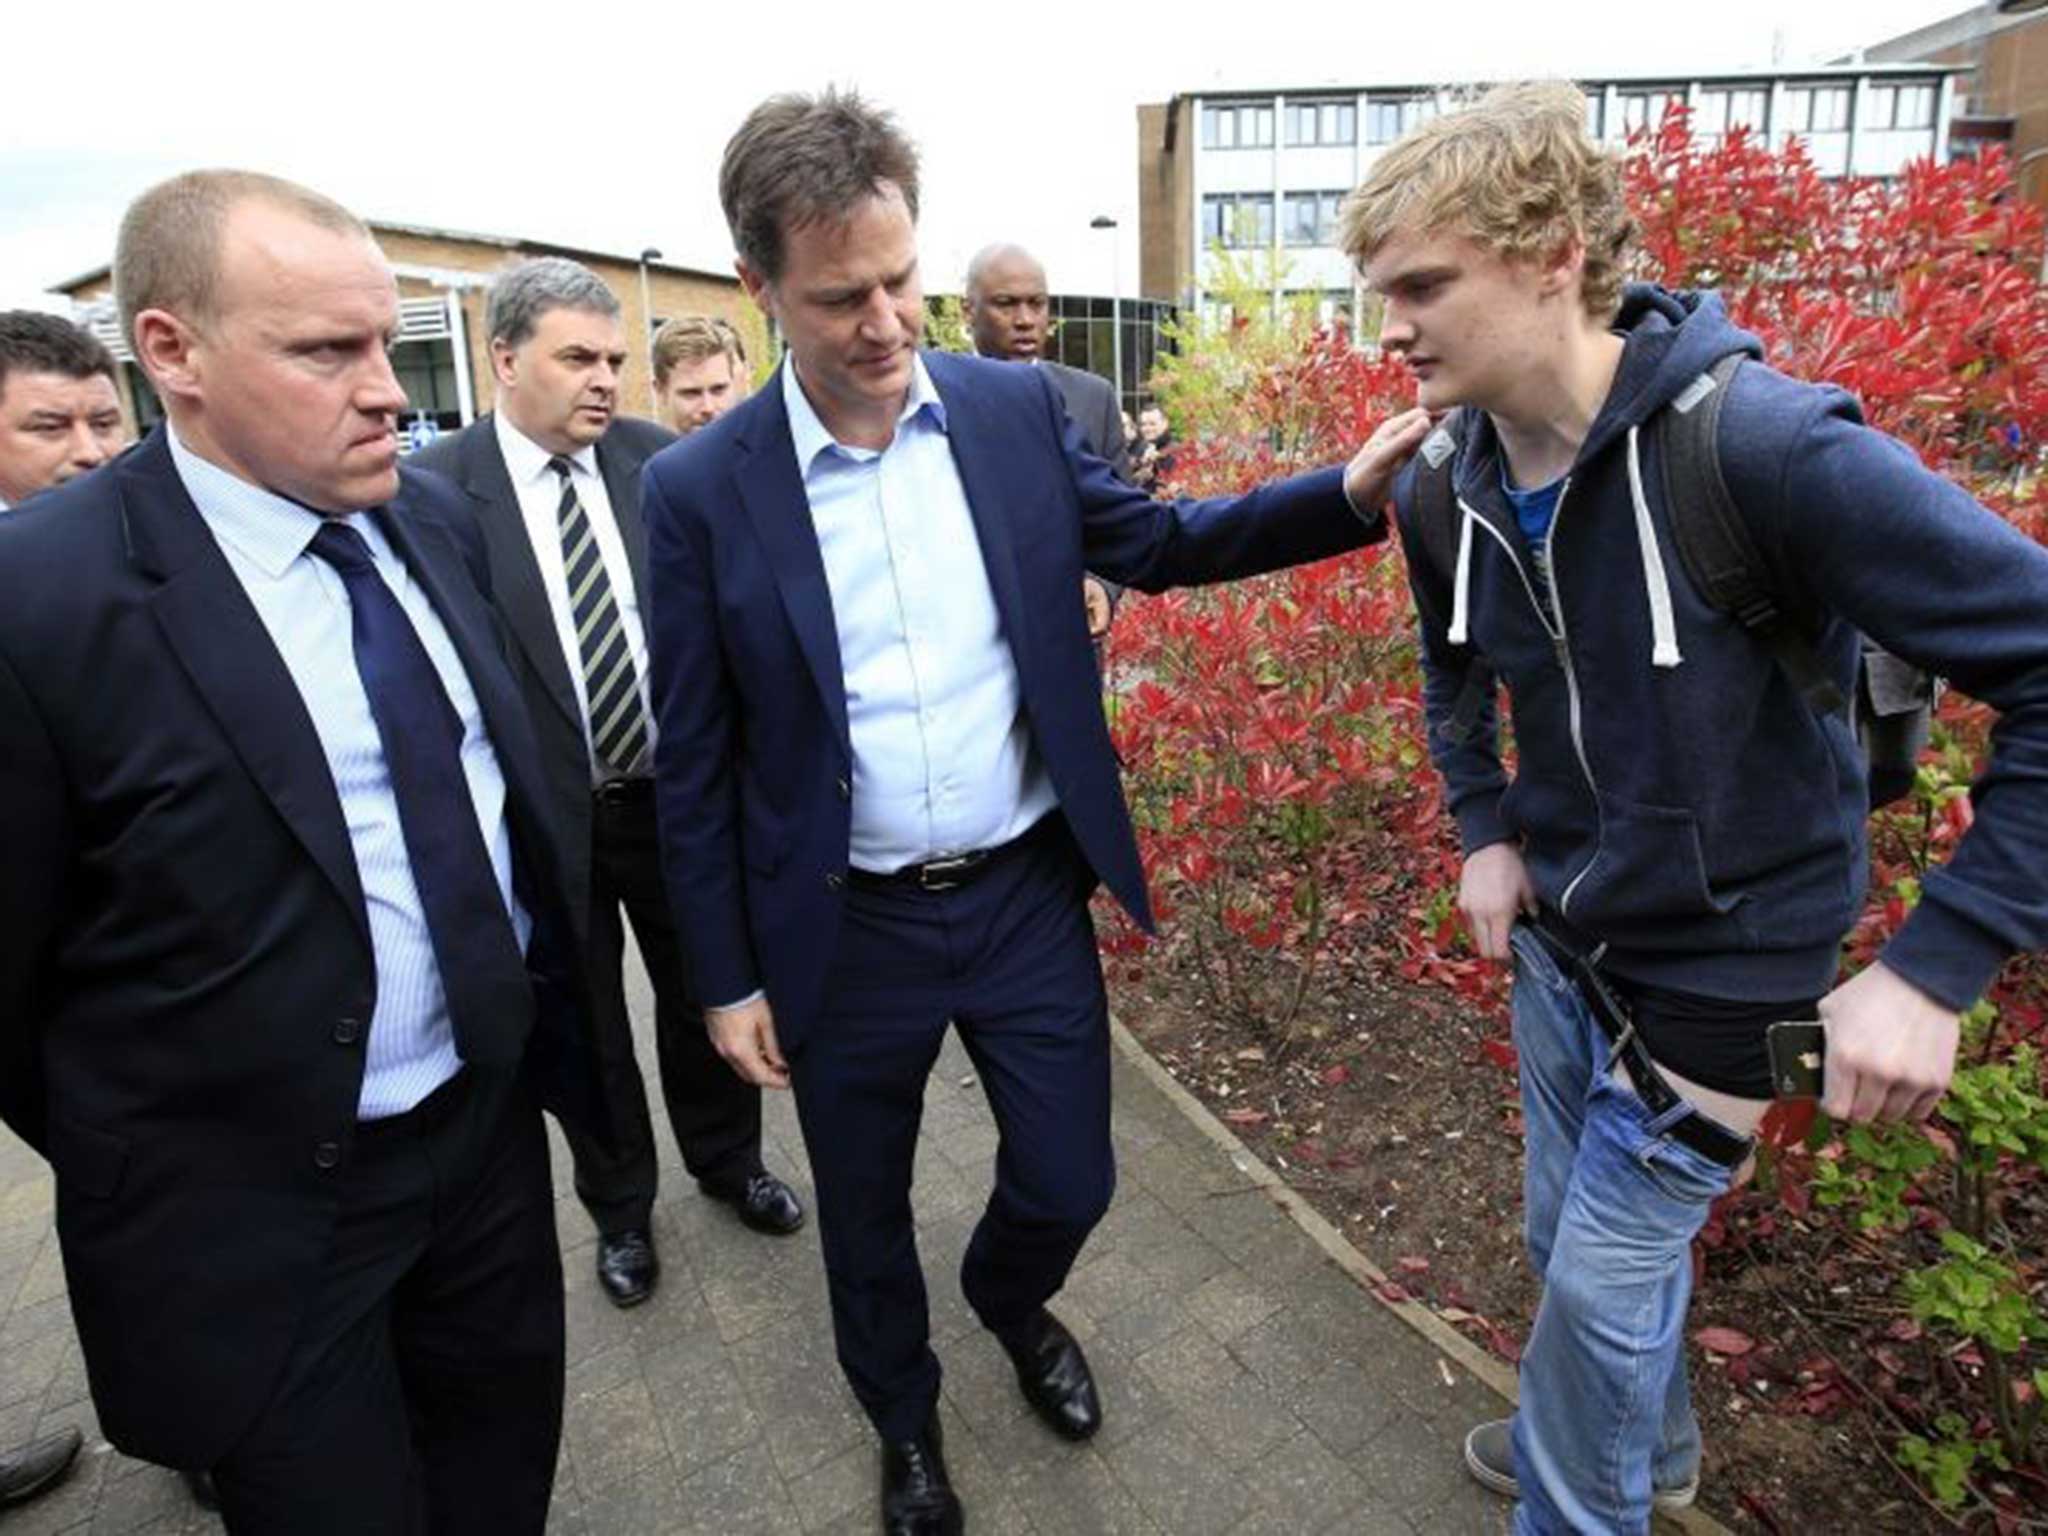 Nick Clegg appears unsure how to react to Mr Carrie's wardrobe malfunction